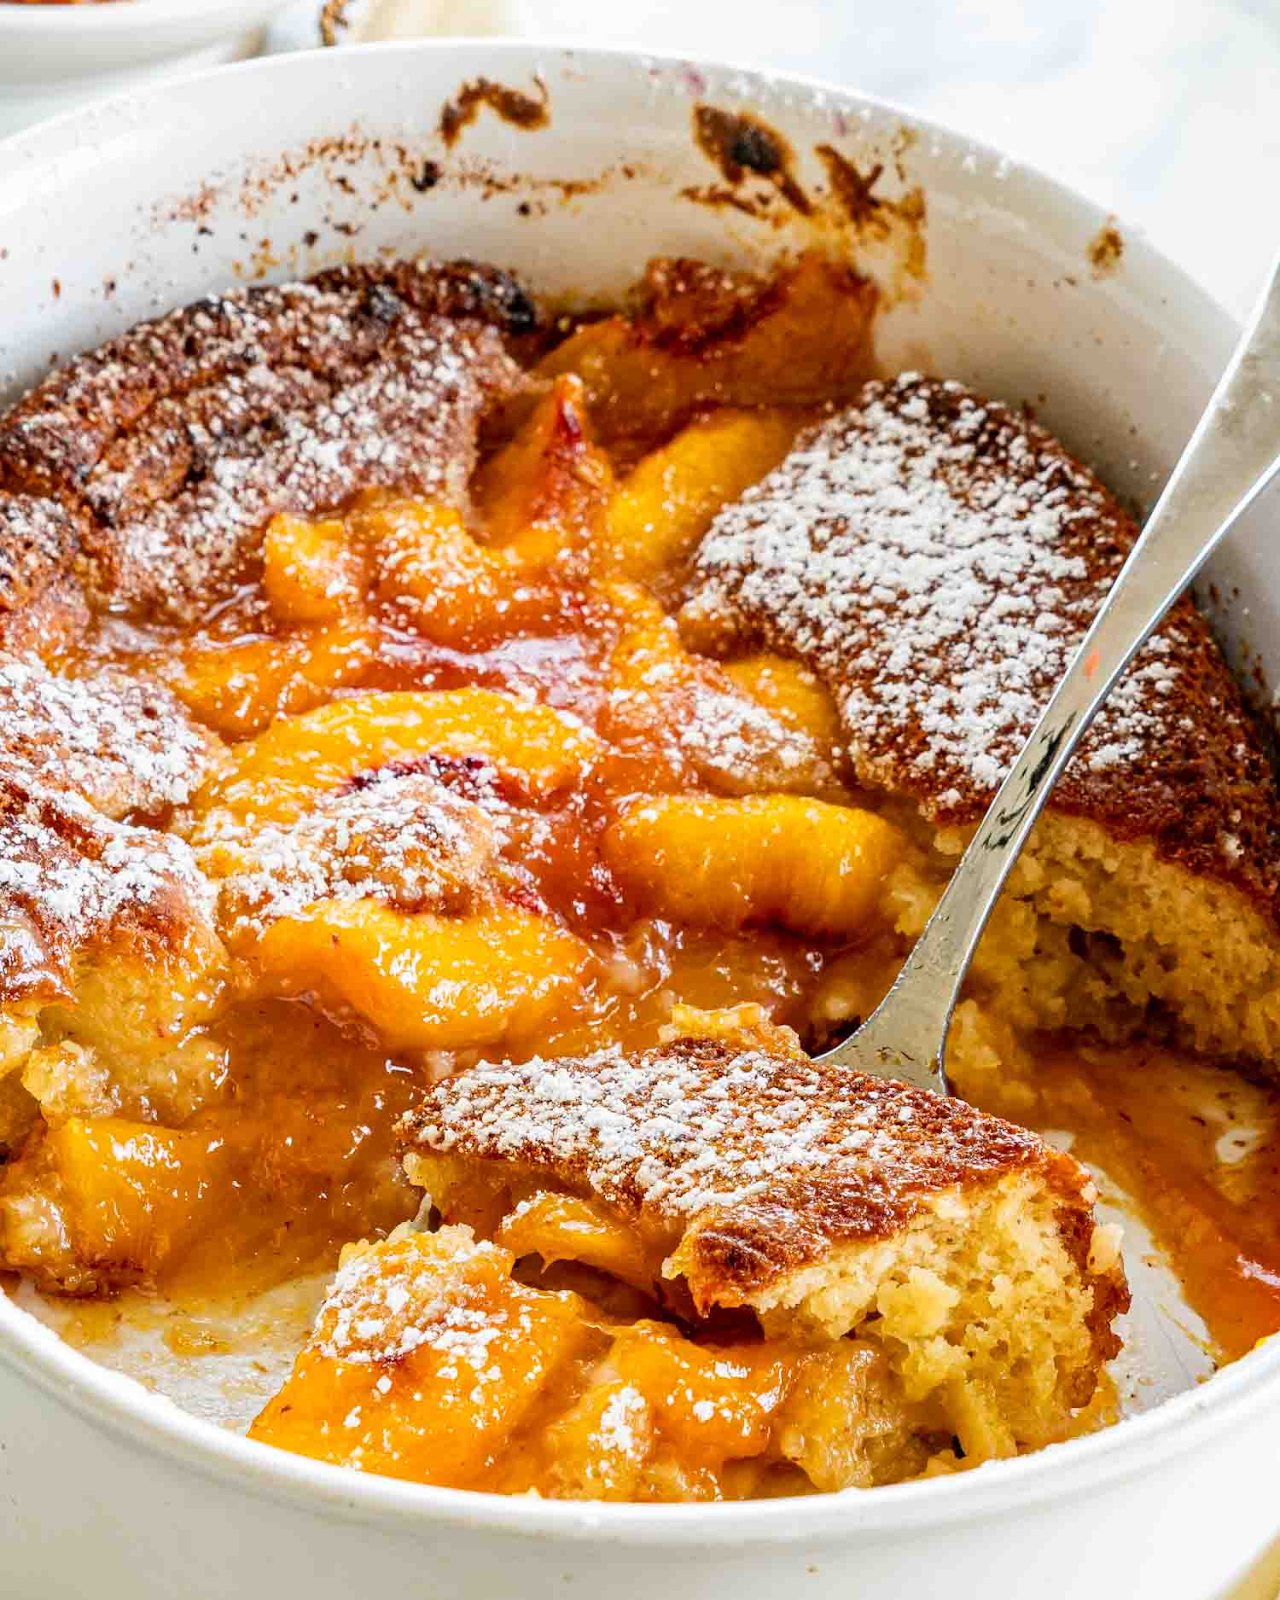 Peach cobbler is a classic Southern dessert that has a rich history in American cuisine